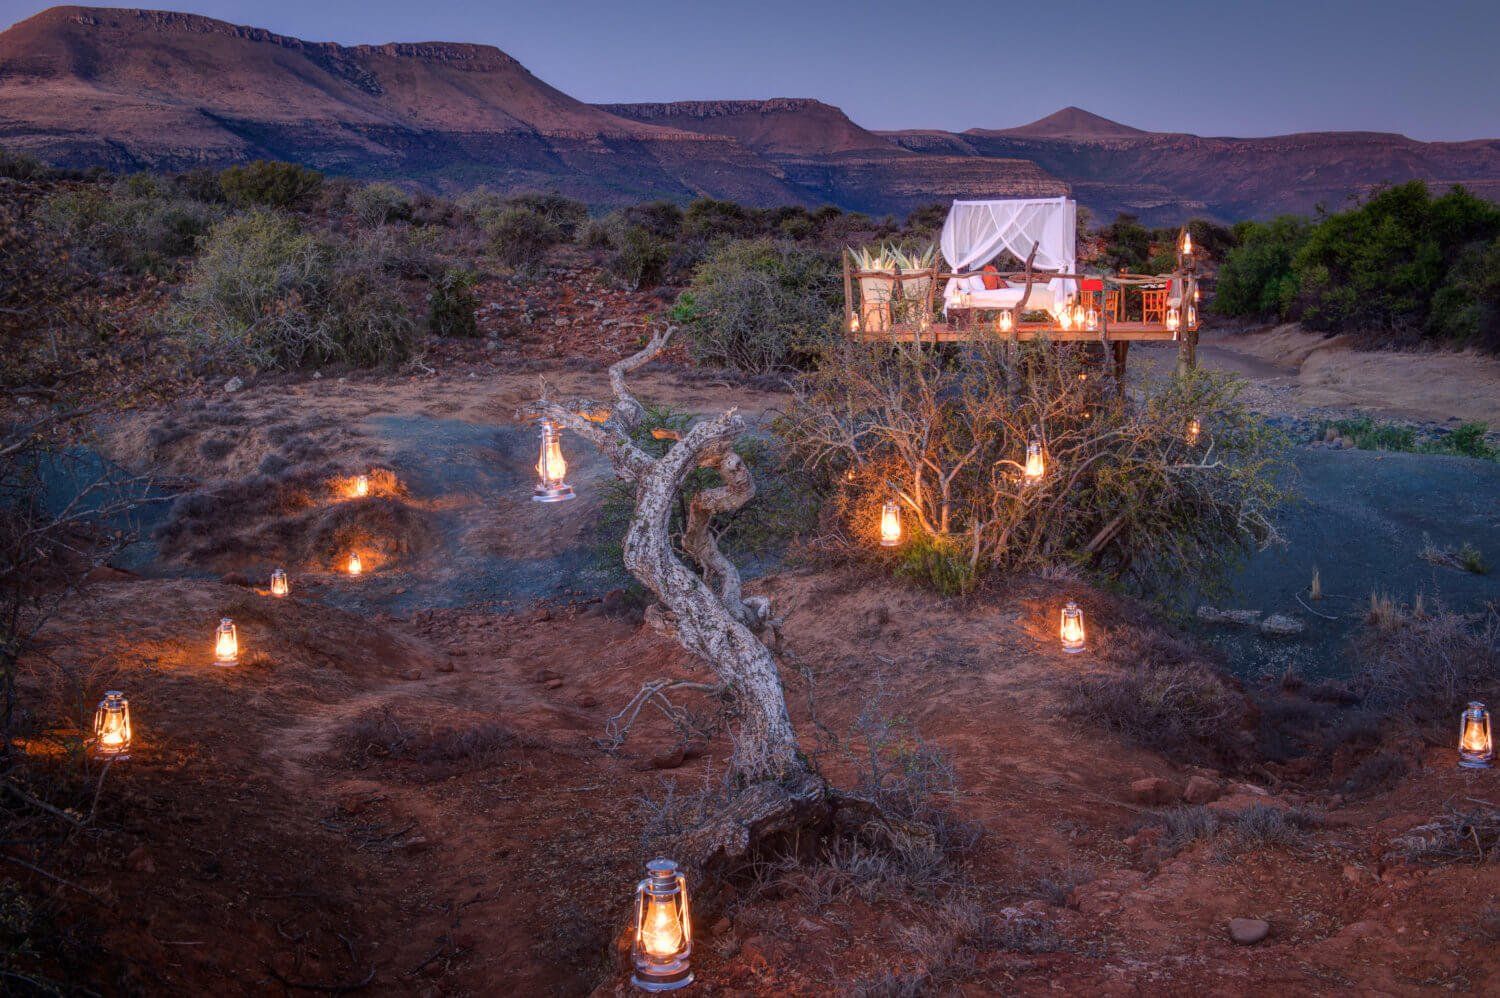 Relax in your star bed 5* Karoo safari